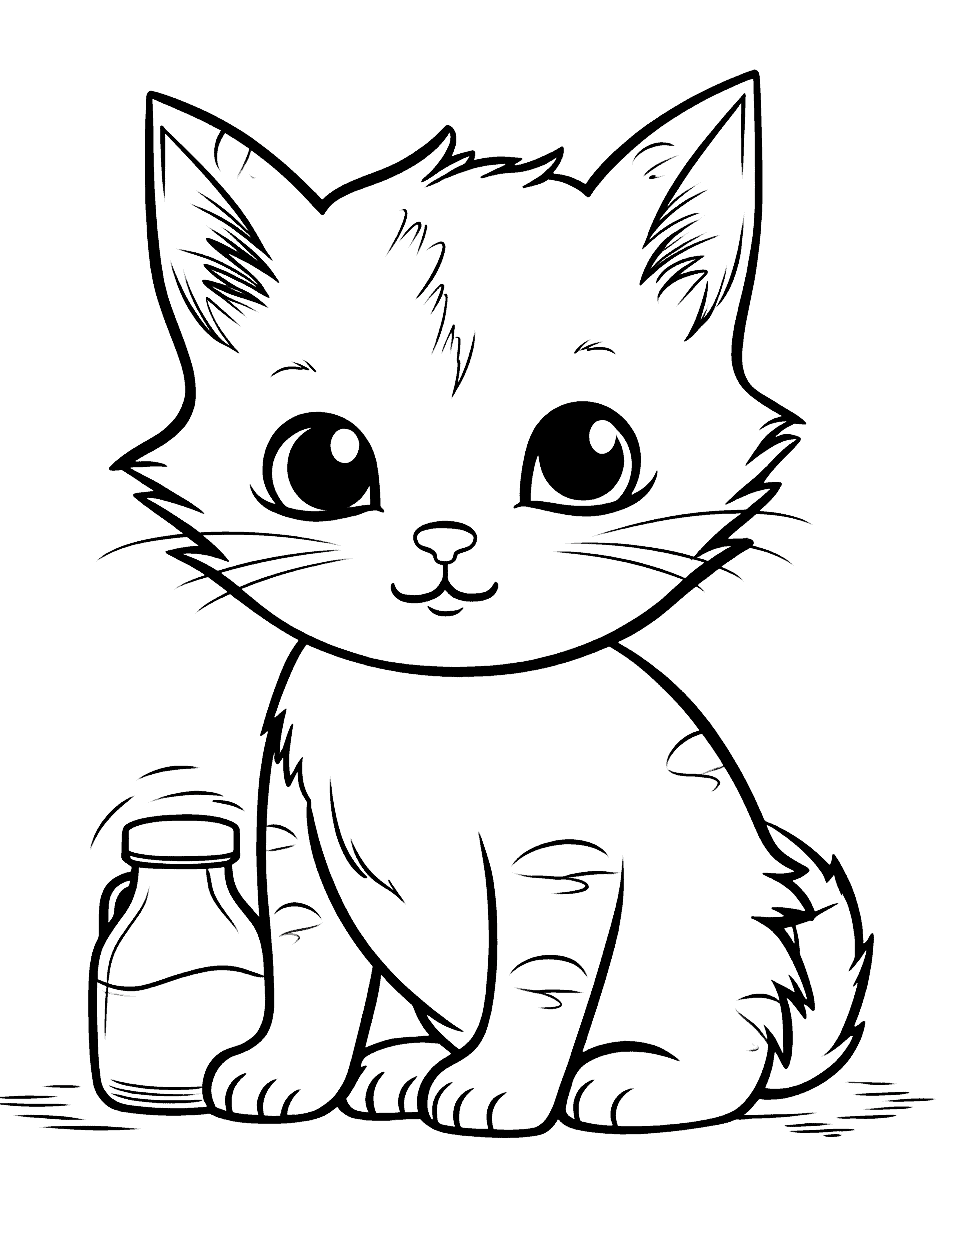 Baby Cat With a Milk Bottle Coloring Page - A baby cat eagerly standing next to a small milk bottle.